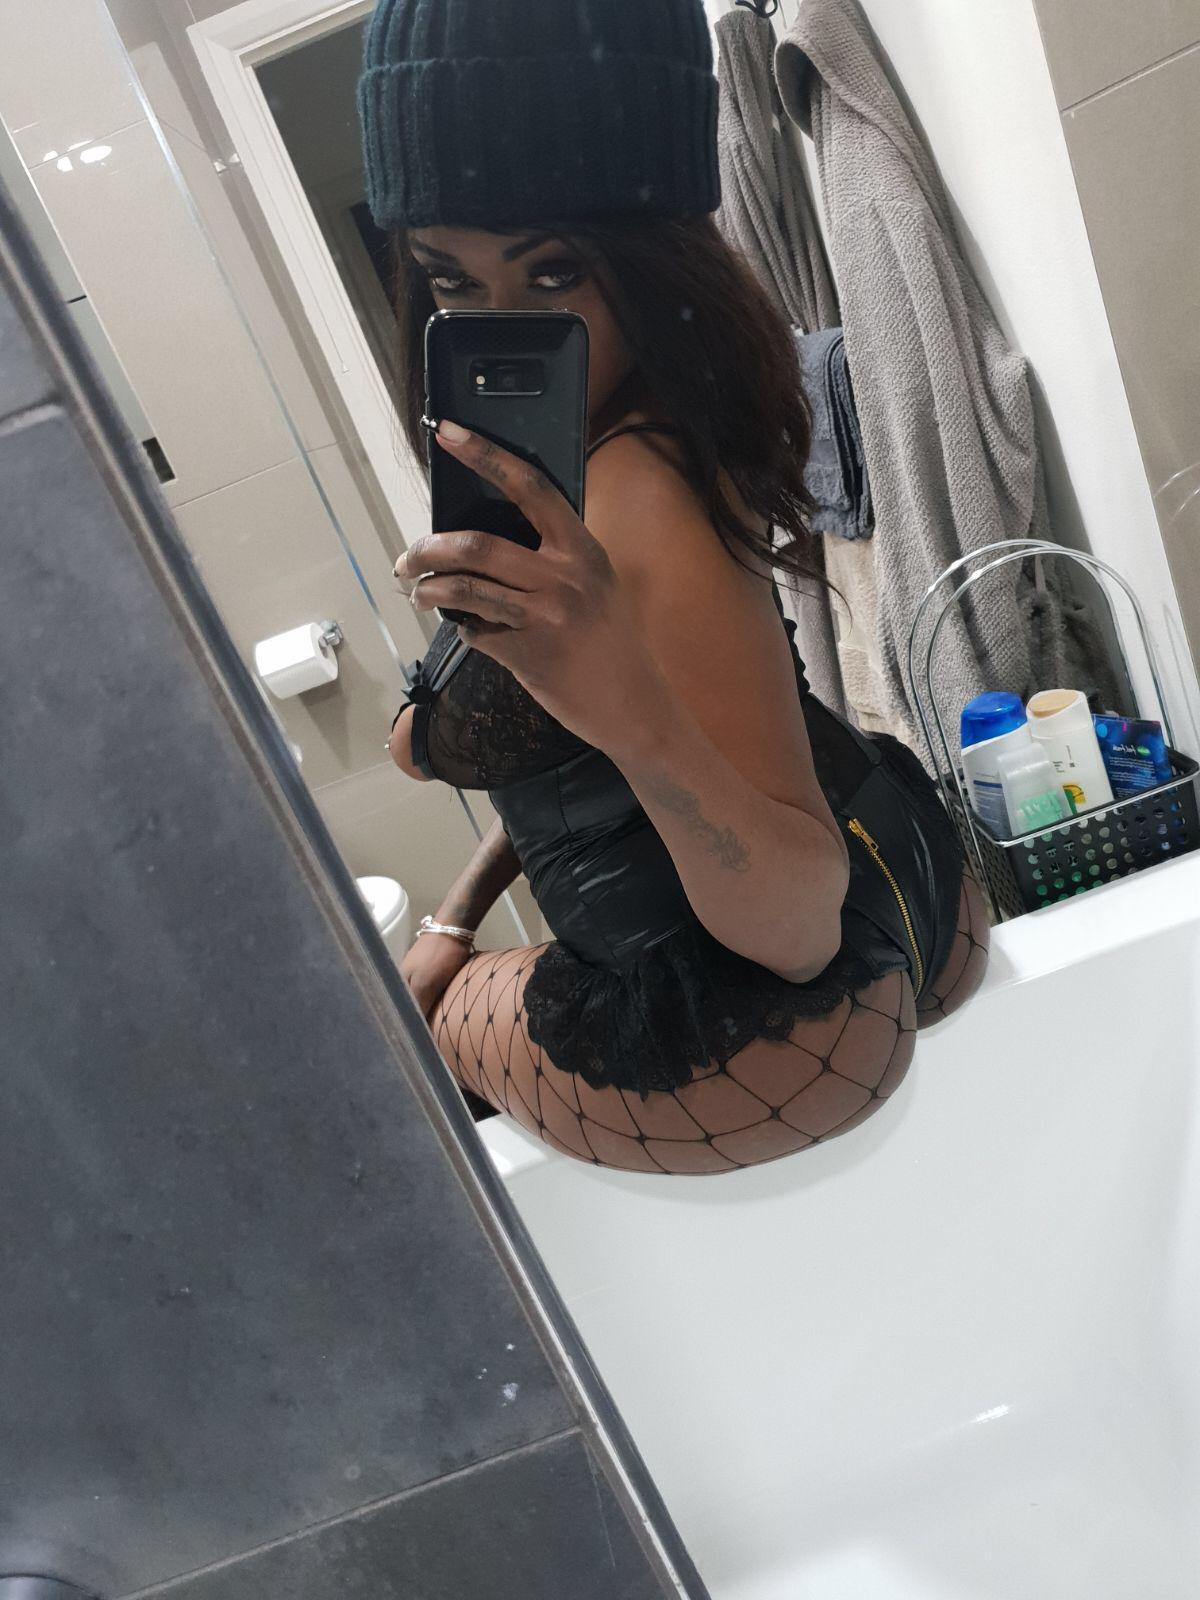 Nikki taking a picture in a mirror wearing very sexy leather underwear